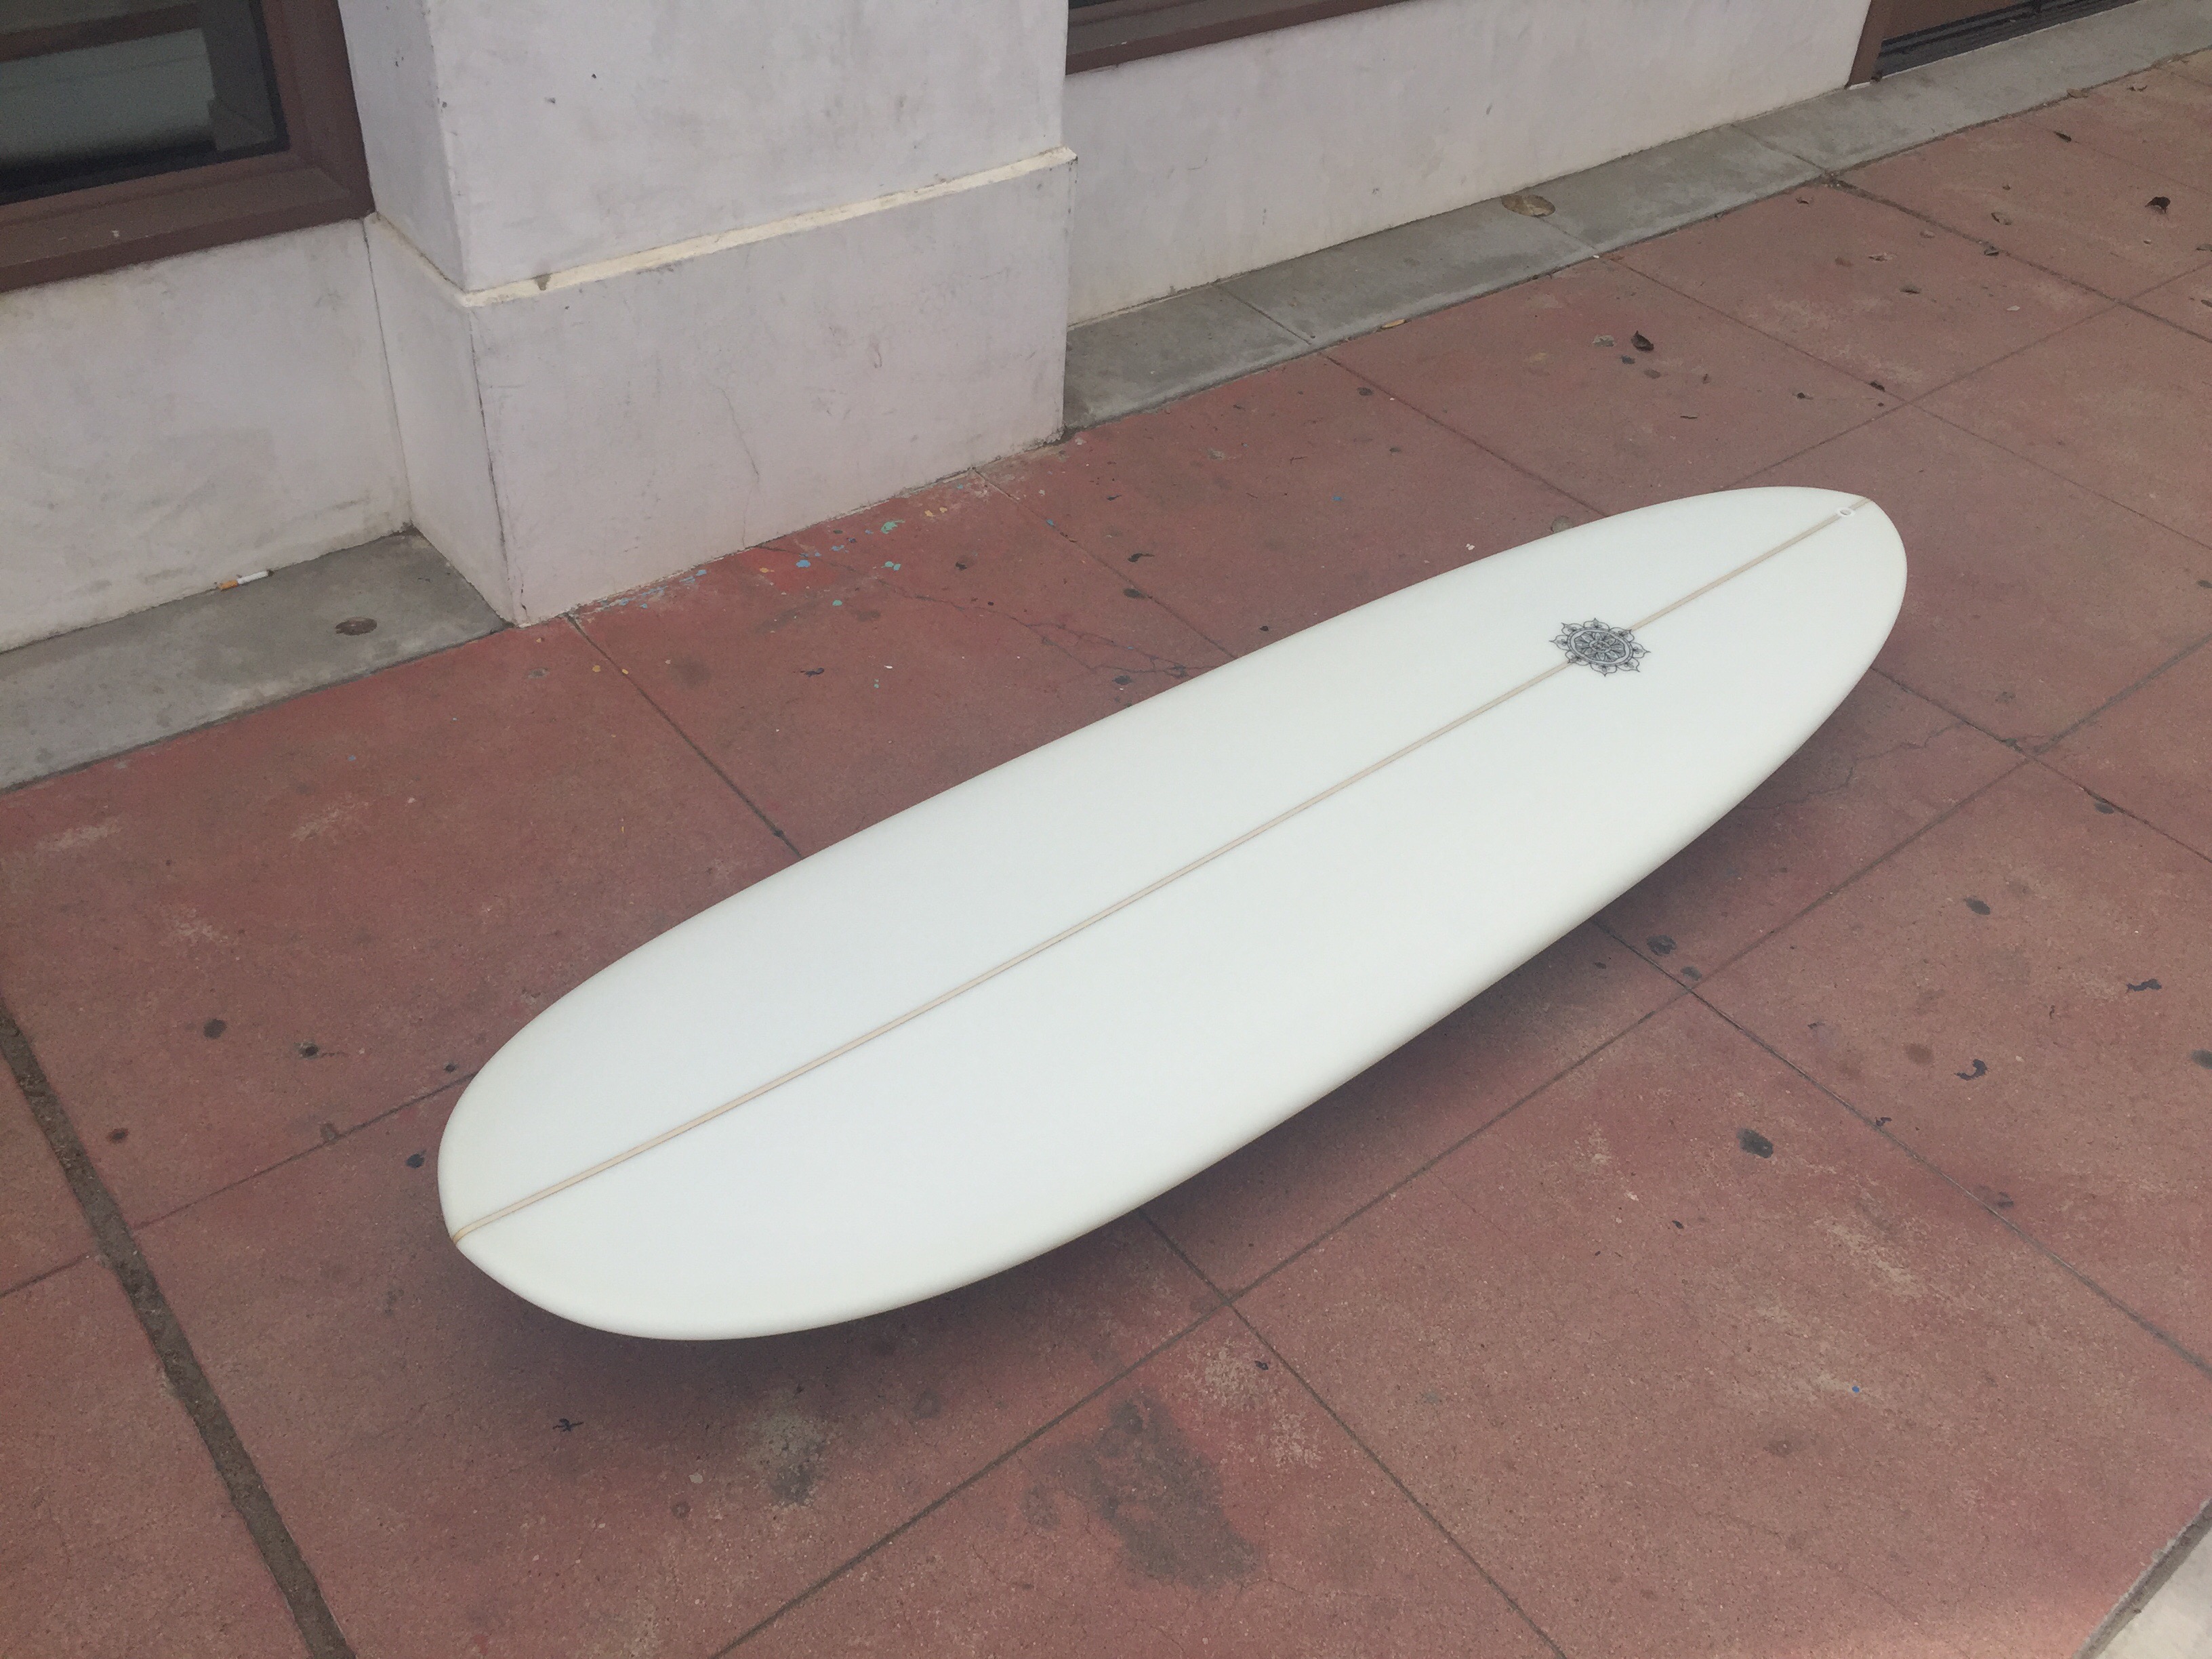 Groovy 7’0″ for a friend we know 